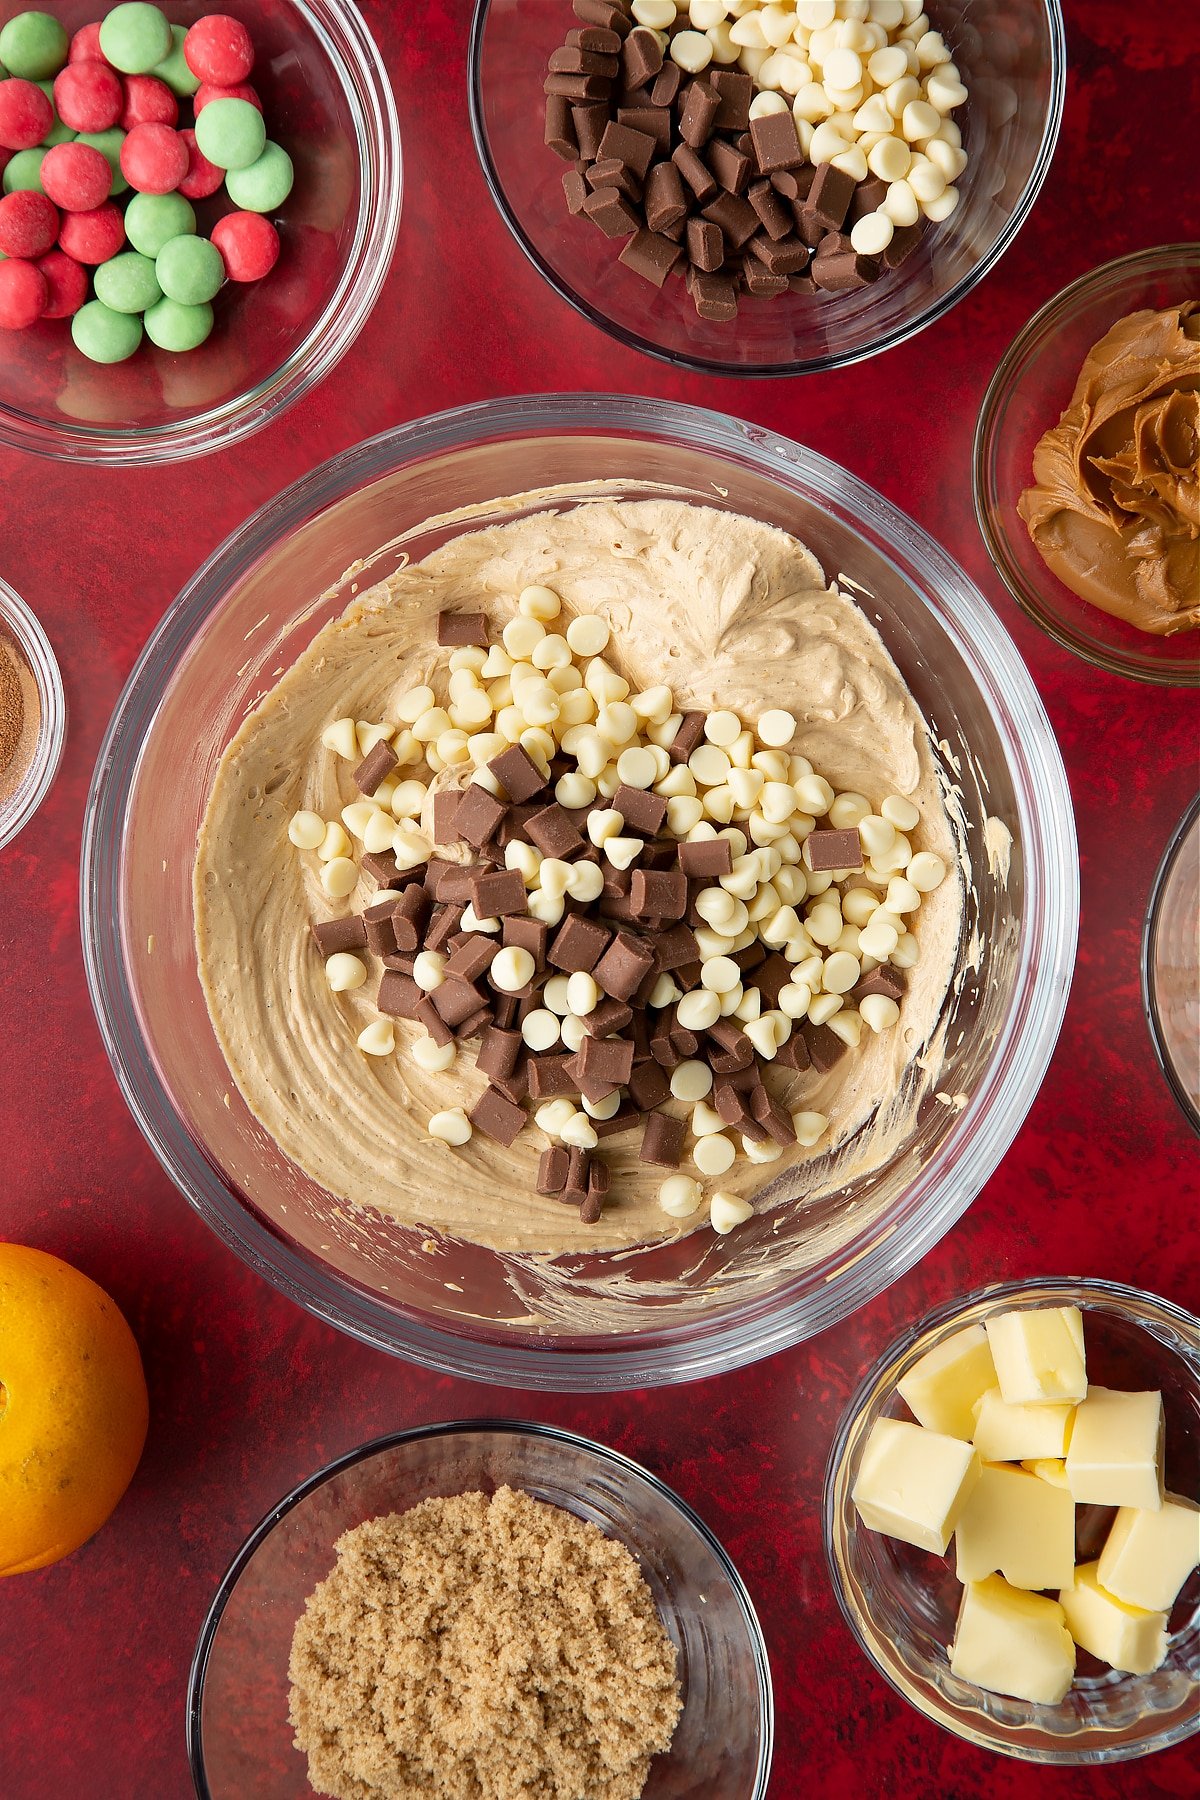 Butter, cream cheese, Biscoff spread, sugar, orange zest and cinnamon, whisked together in a mixing bowl with white and milk chocolate chips on top. Ingredients to make Christmas cookie dip surround the bowl.